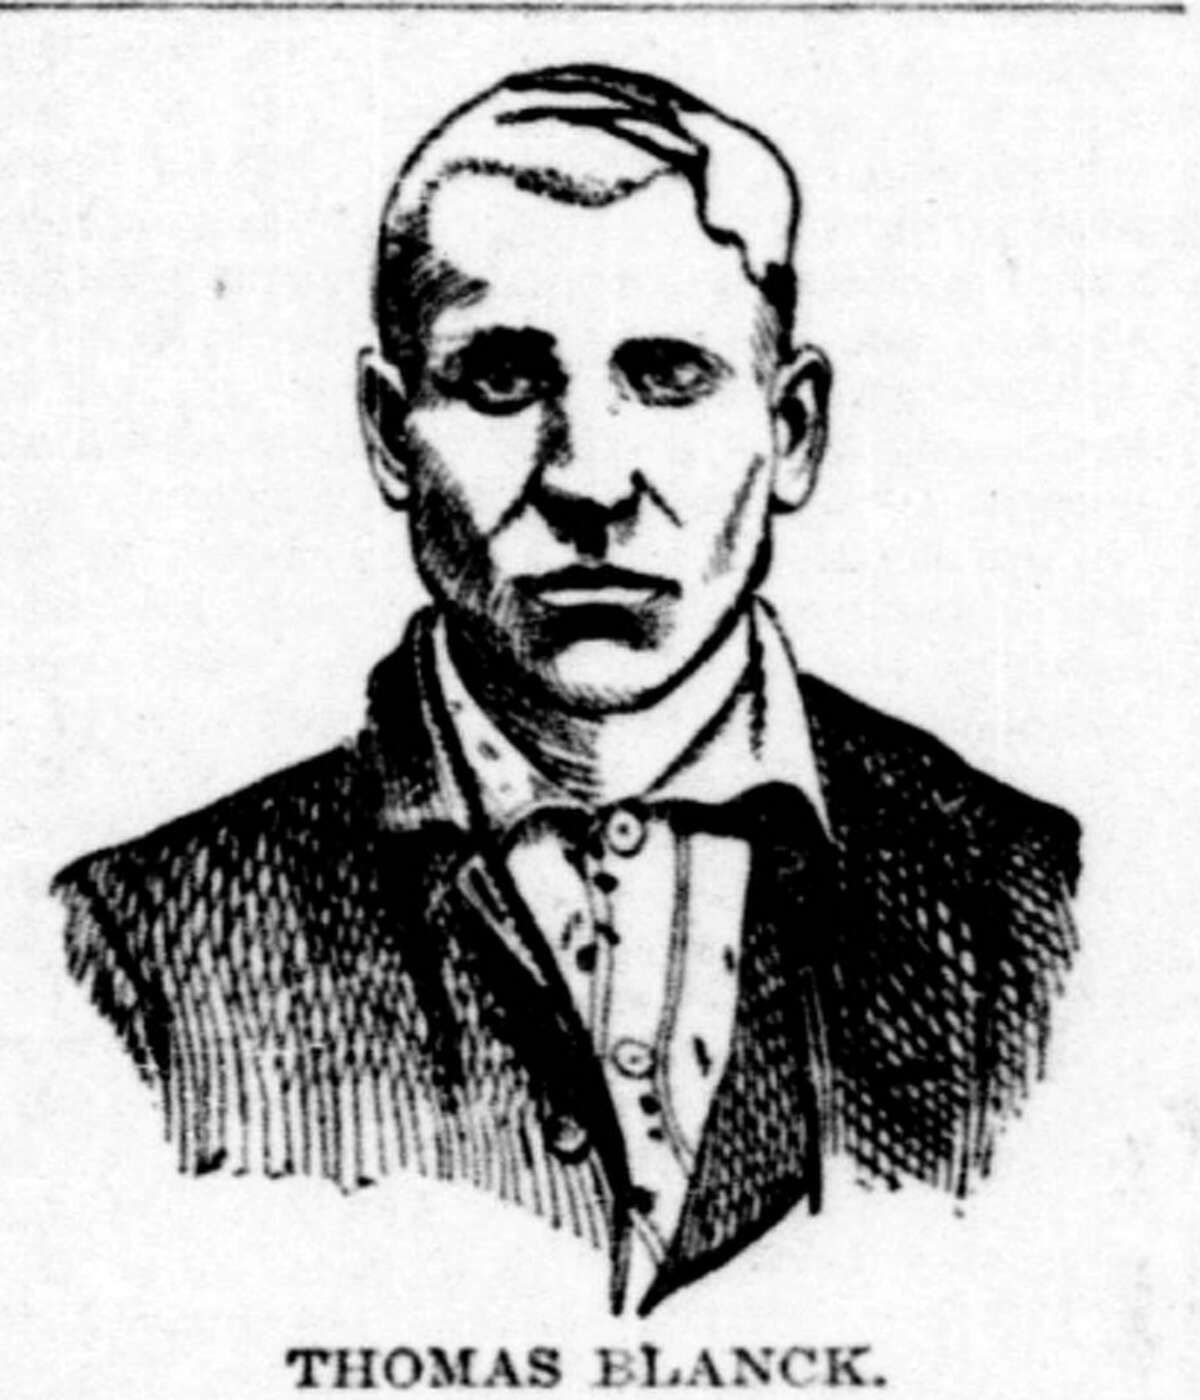 Thomas Blanck – Having killed a Seattle barman the year before, Blanck was under a death sentence on March 17, 1895, when he fashioned a fake handgun and held up the night jailer. He broke out, bringing 10 other inmates with him, but was shot to death in a gunfight with police four days later. At least 18,000 people visited the outlaw’s corpse, including one woman who kissed the killer.